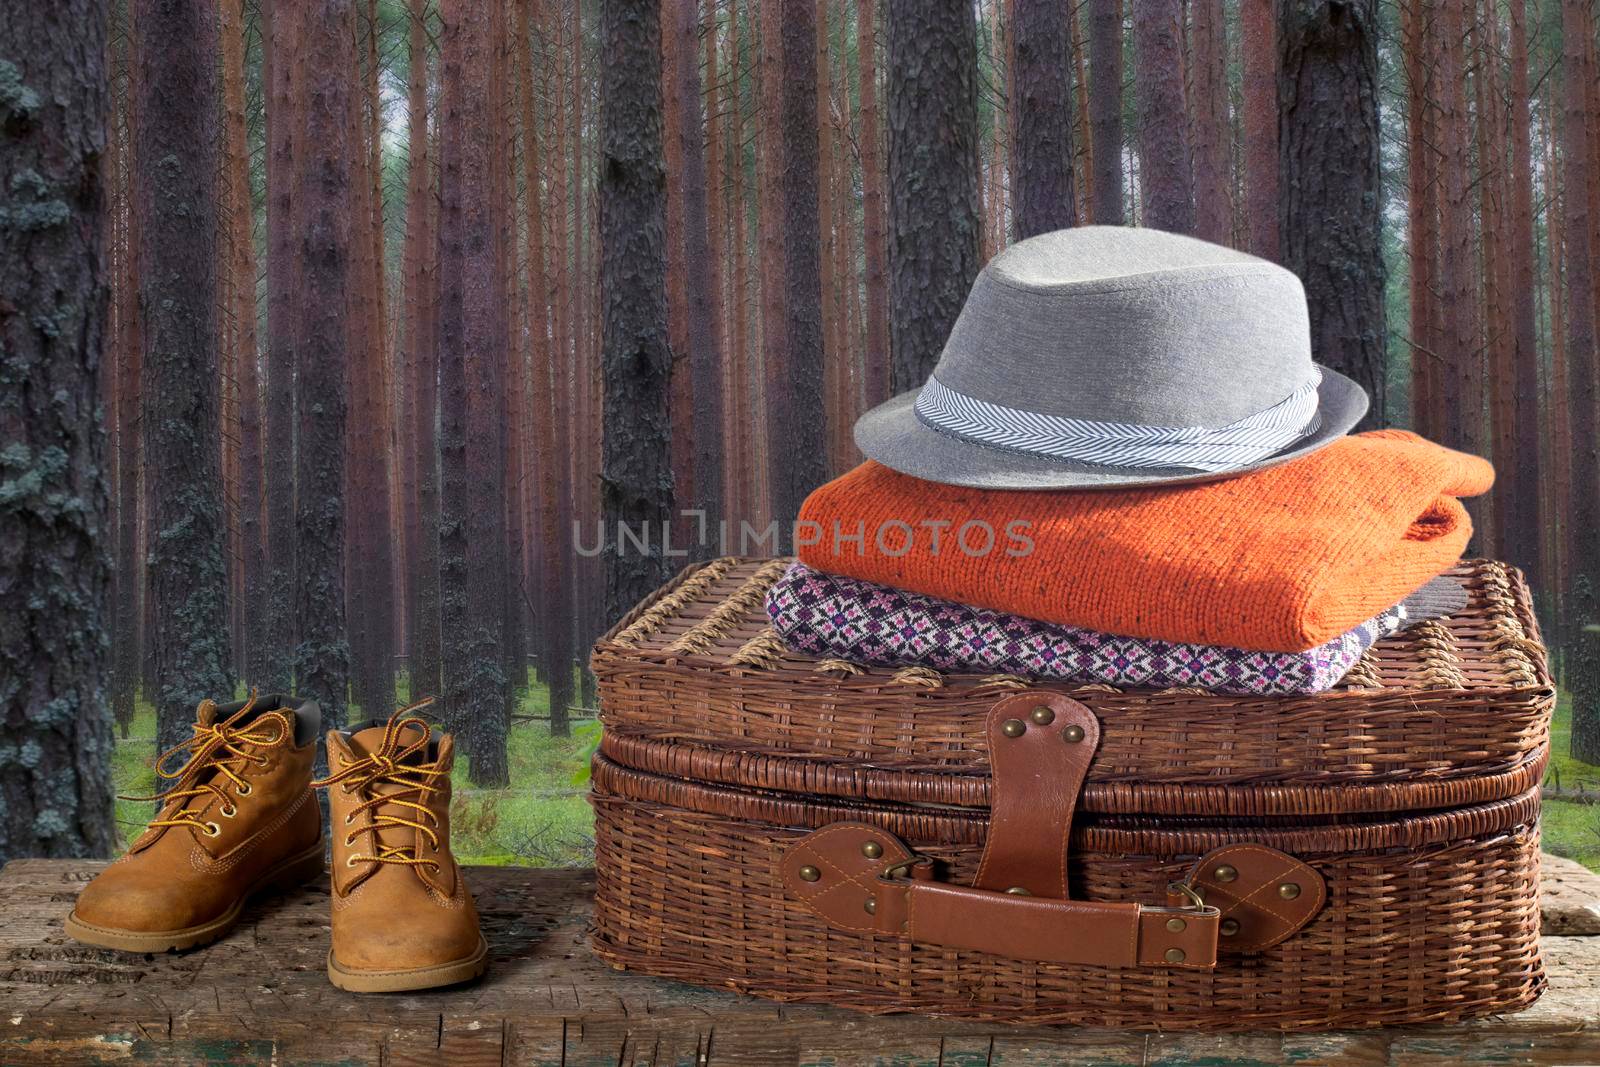 Suitcase with warm clothes and boots on wooden surface of bench against beautiful summer landscape with pine forest. Concept.